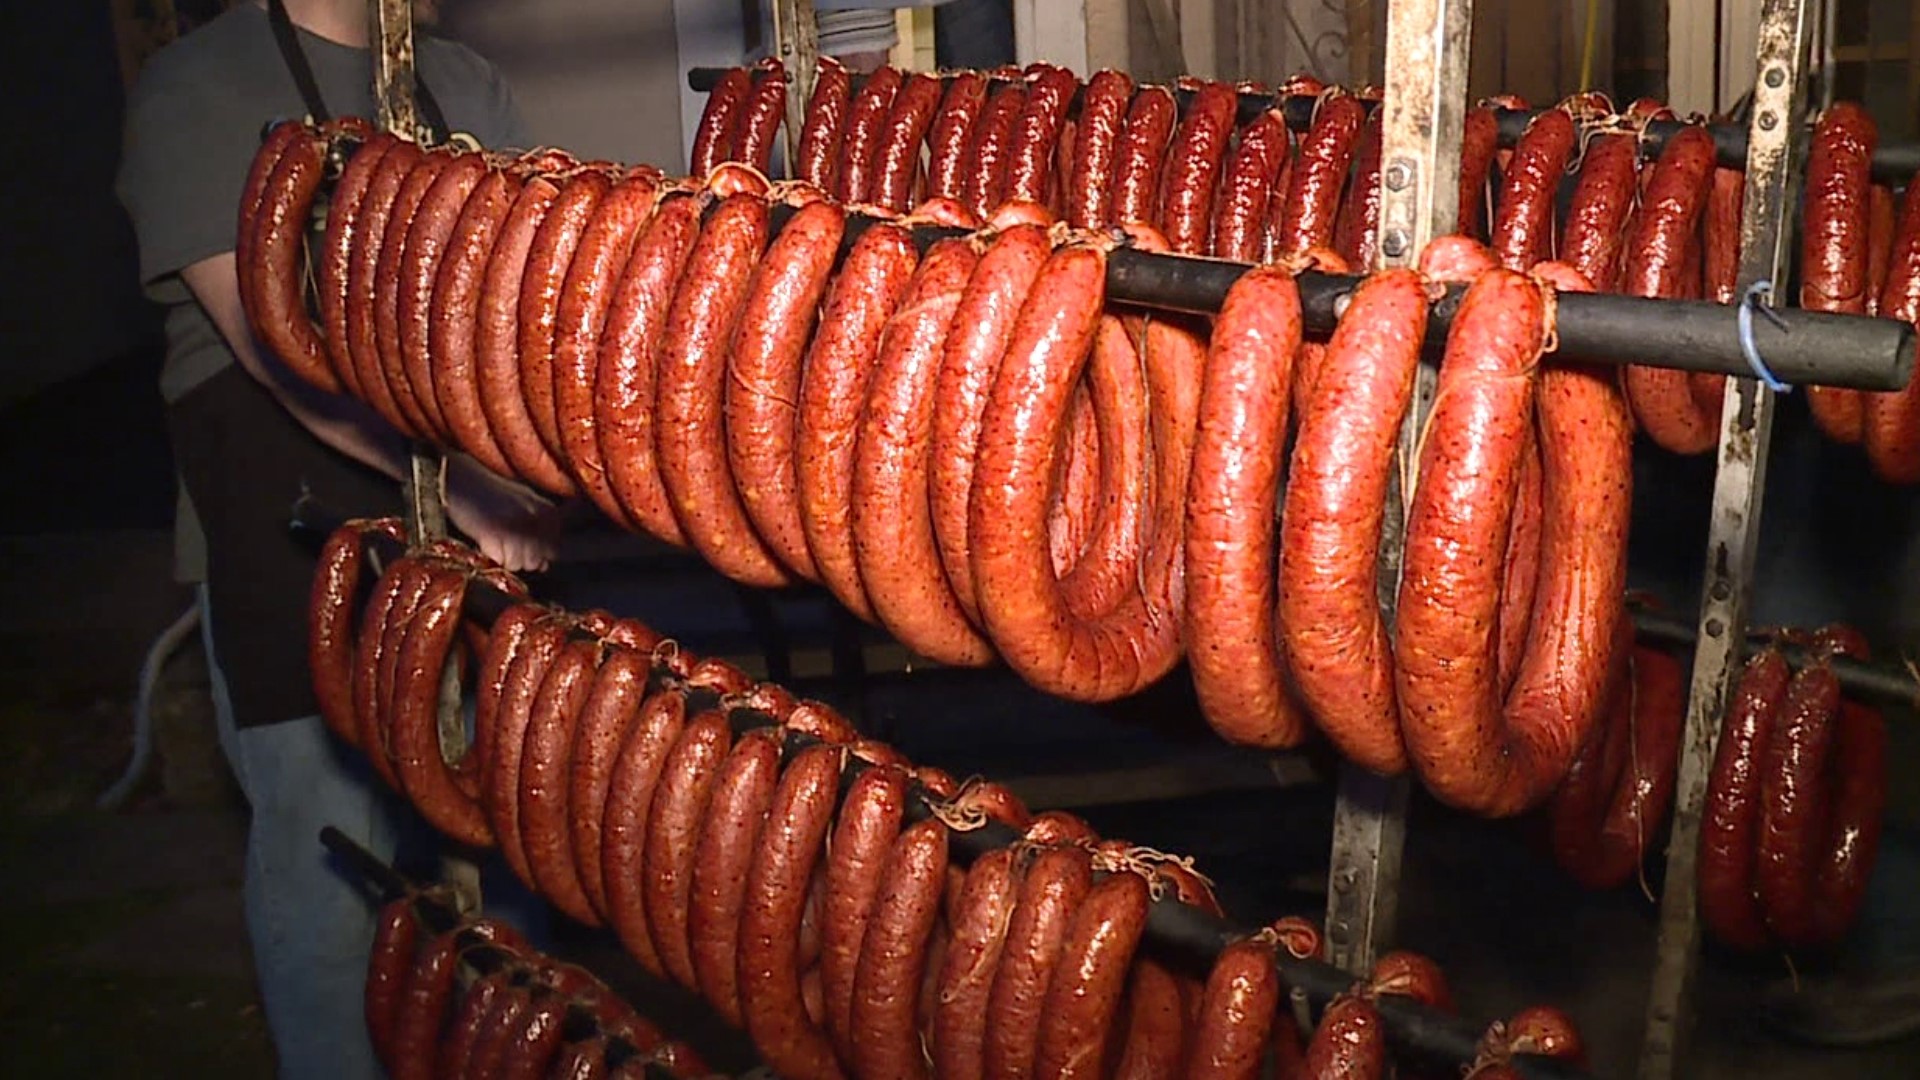 For many area families, it's not Easter dinner without kielbasi, and area shops are ready for you to stock up on that smoked sausage.